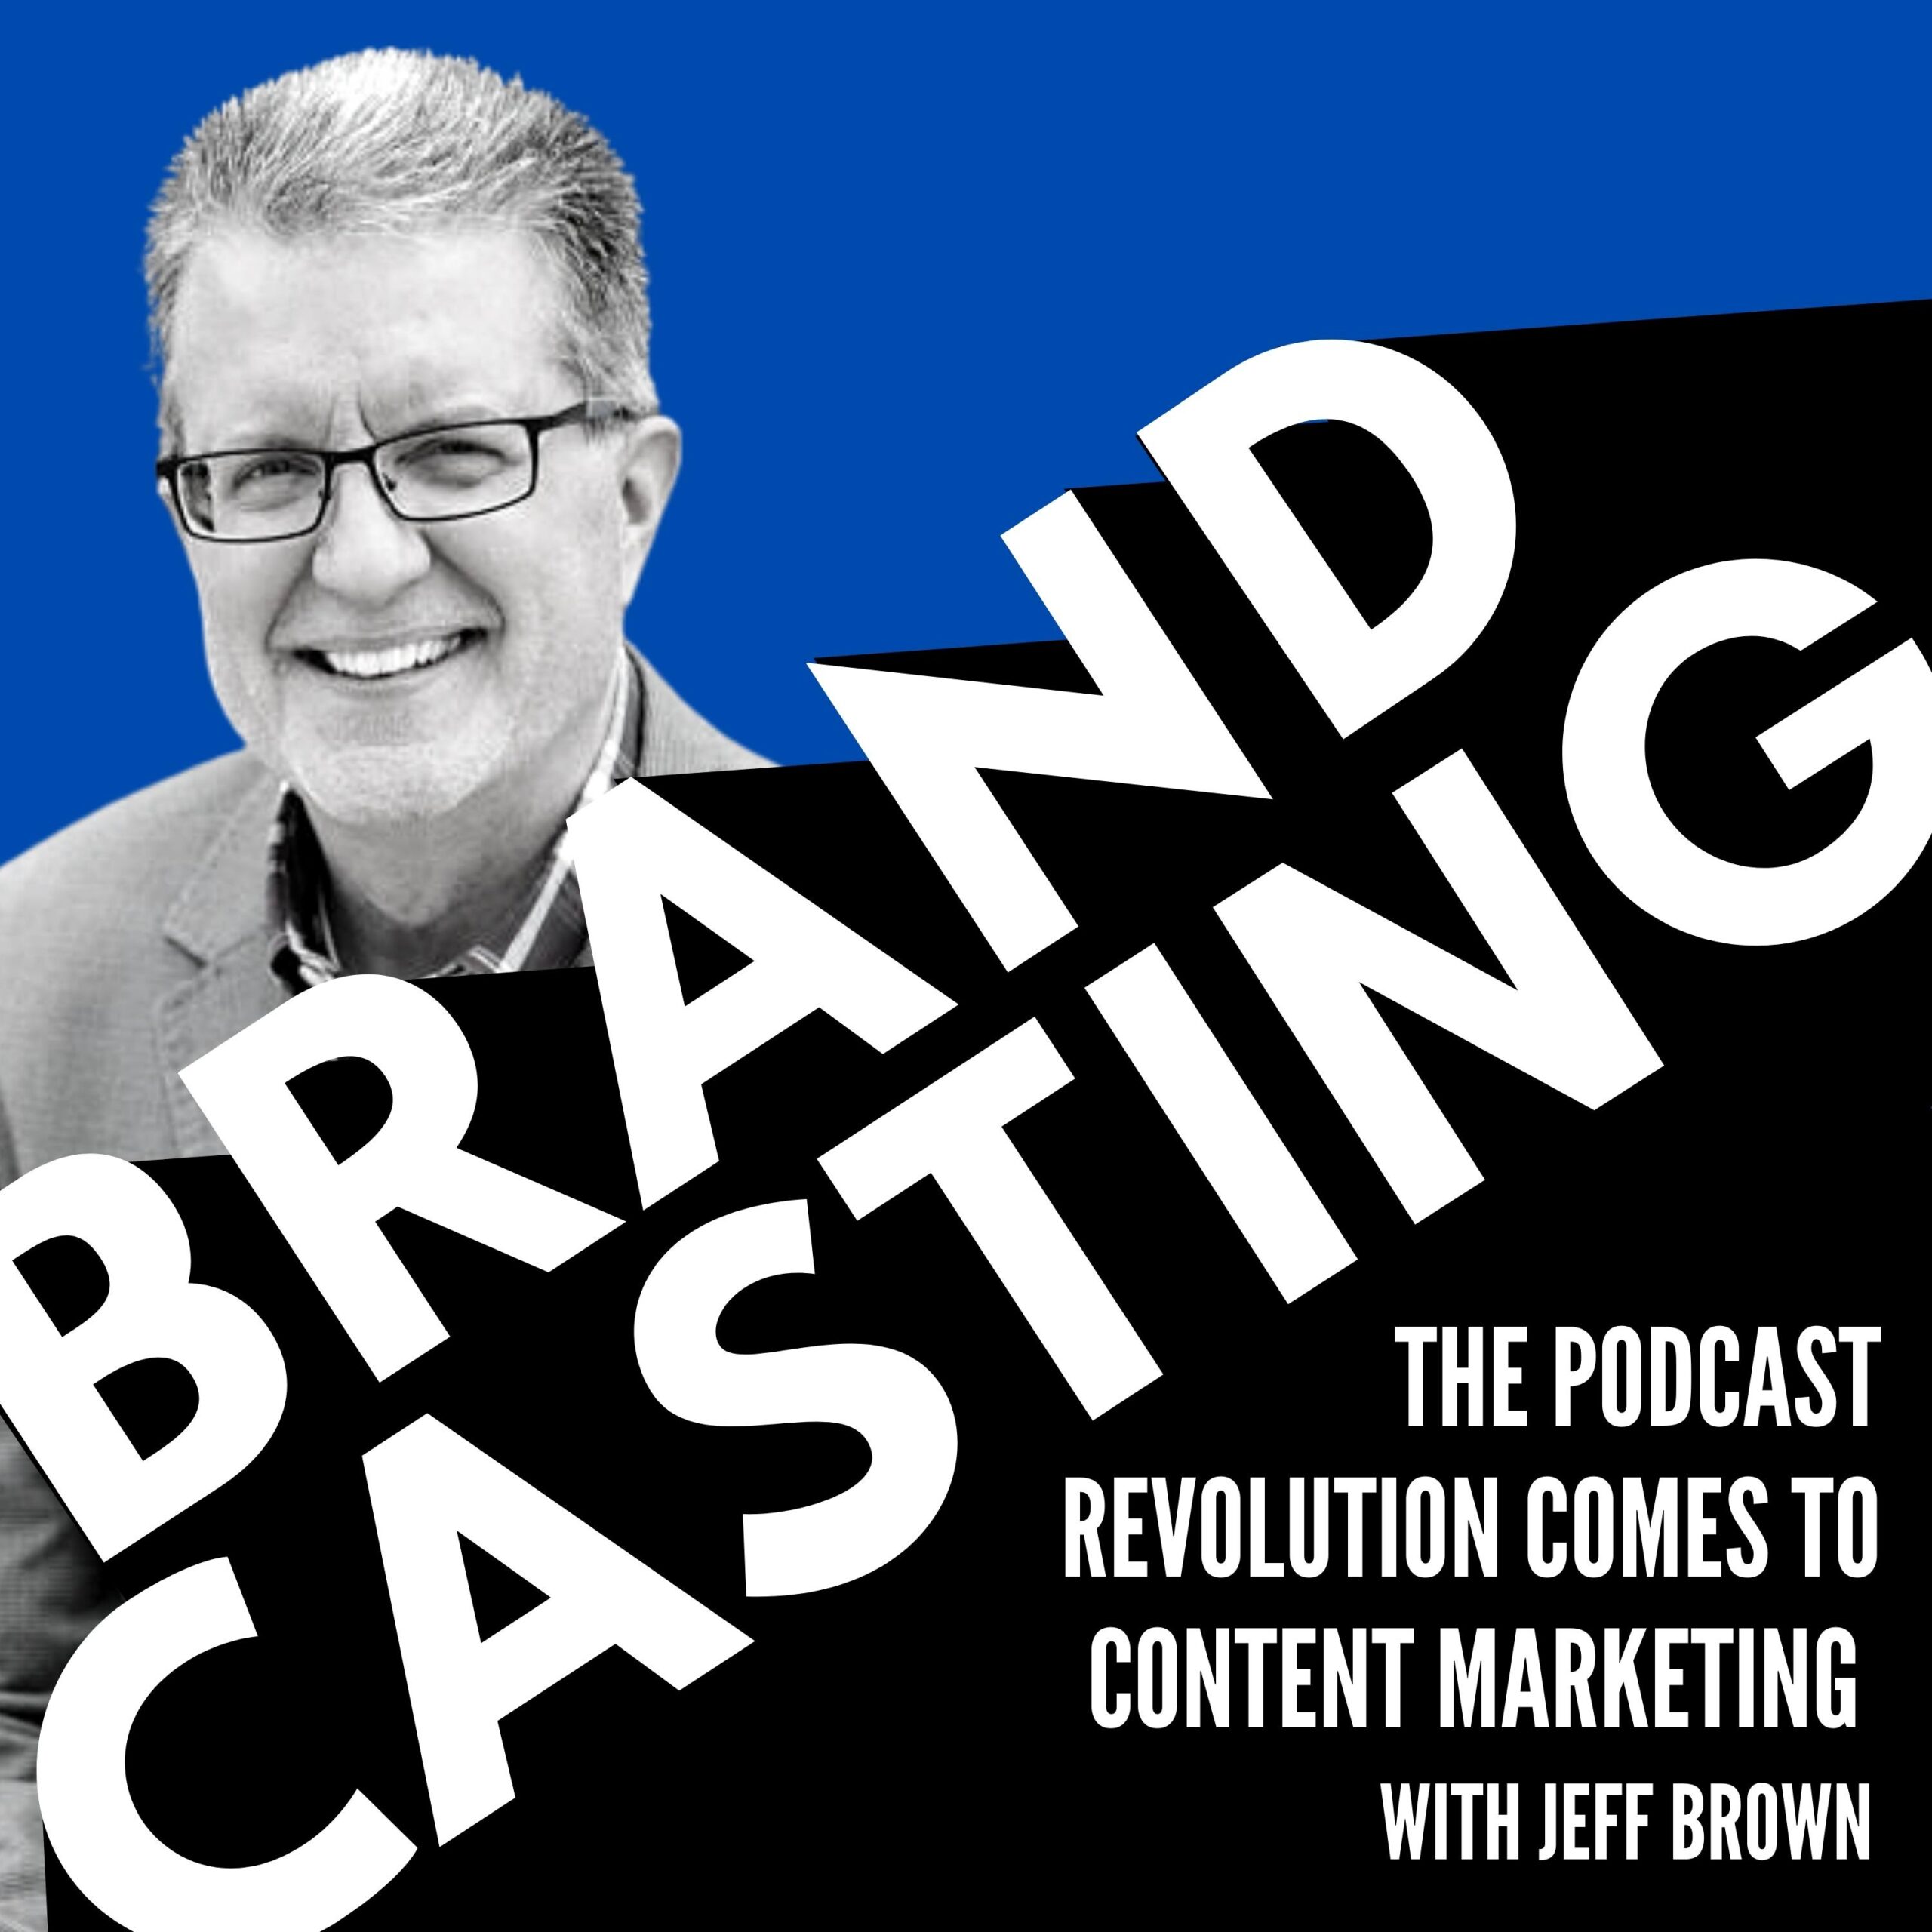 Brandcasting - The Podcast Revolution Comes to Content Marketing with Jeff Brown